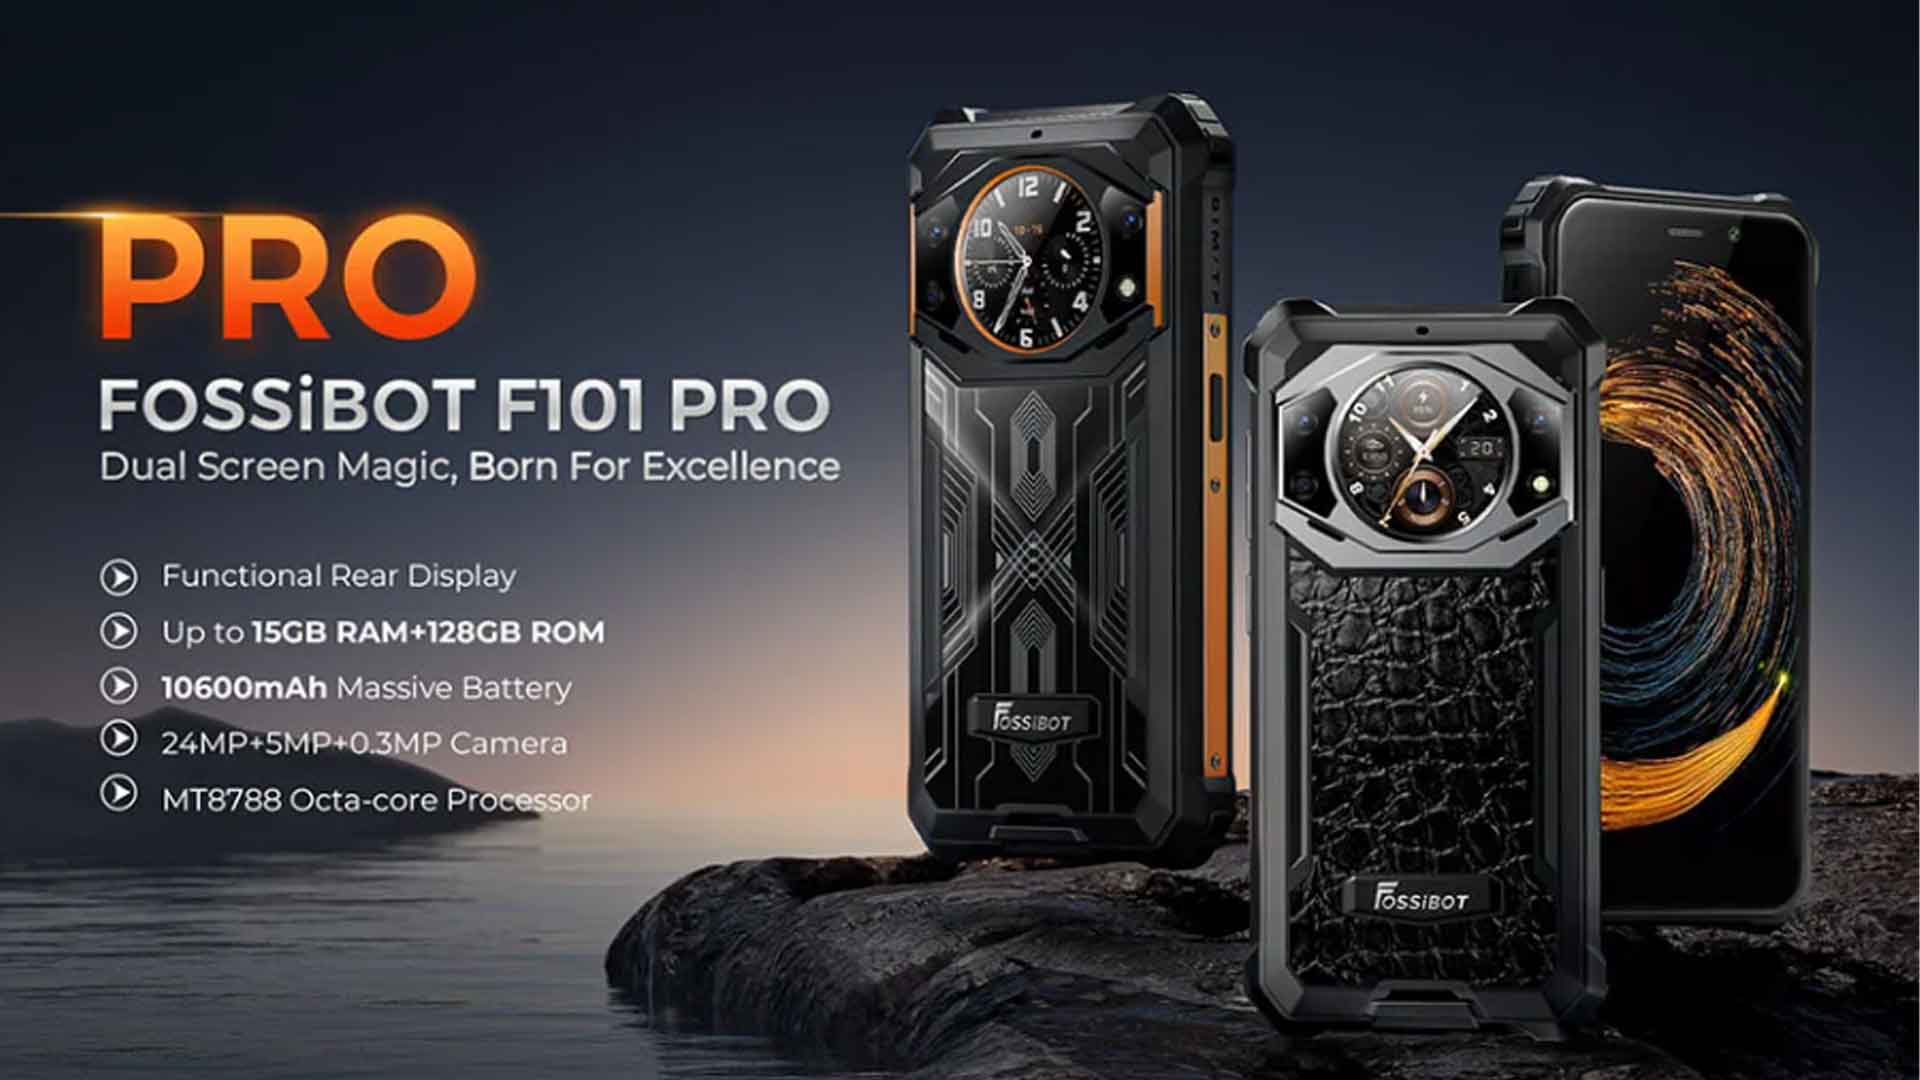 Fossibot F101 Pro review, Fossibot F101 Pro specs, Fossibot F101 Pro features, Fossibot F101 Pro price, Fossibot F101 Pro rugged phone, best rugged phone